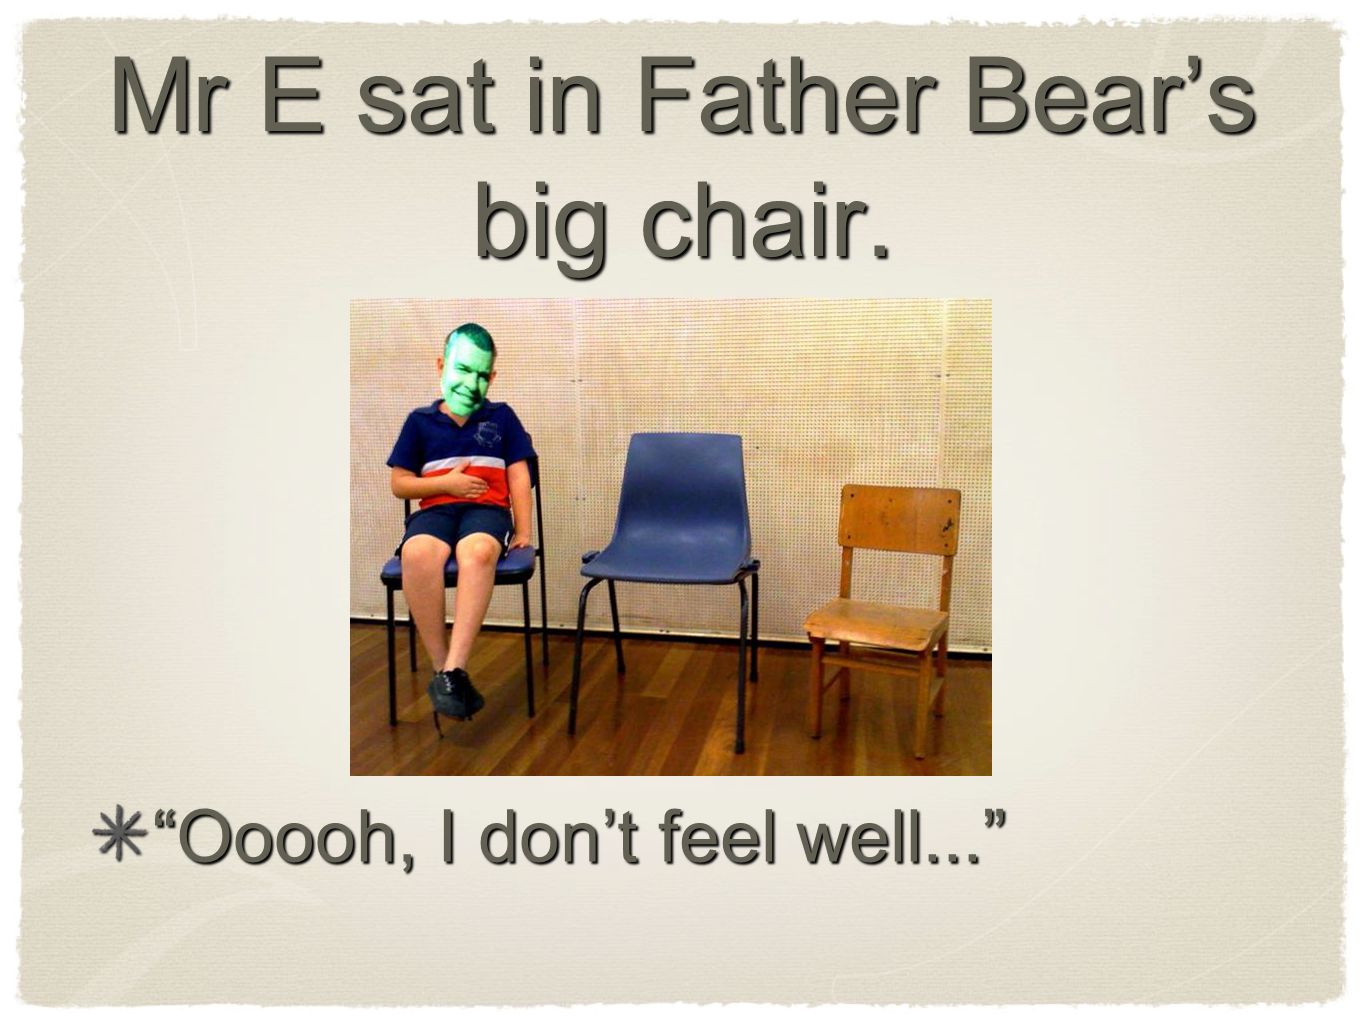 Mr E sat in Father Bear’s big chair. Ooooh, I don’t feel well...